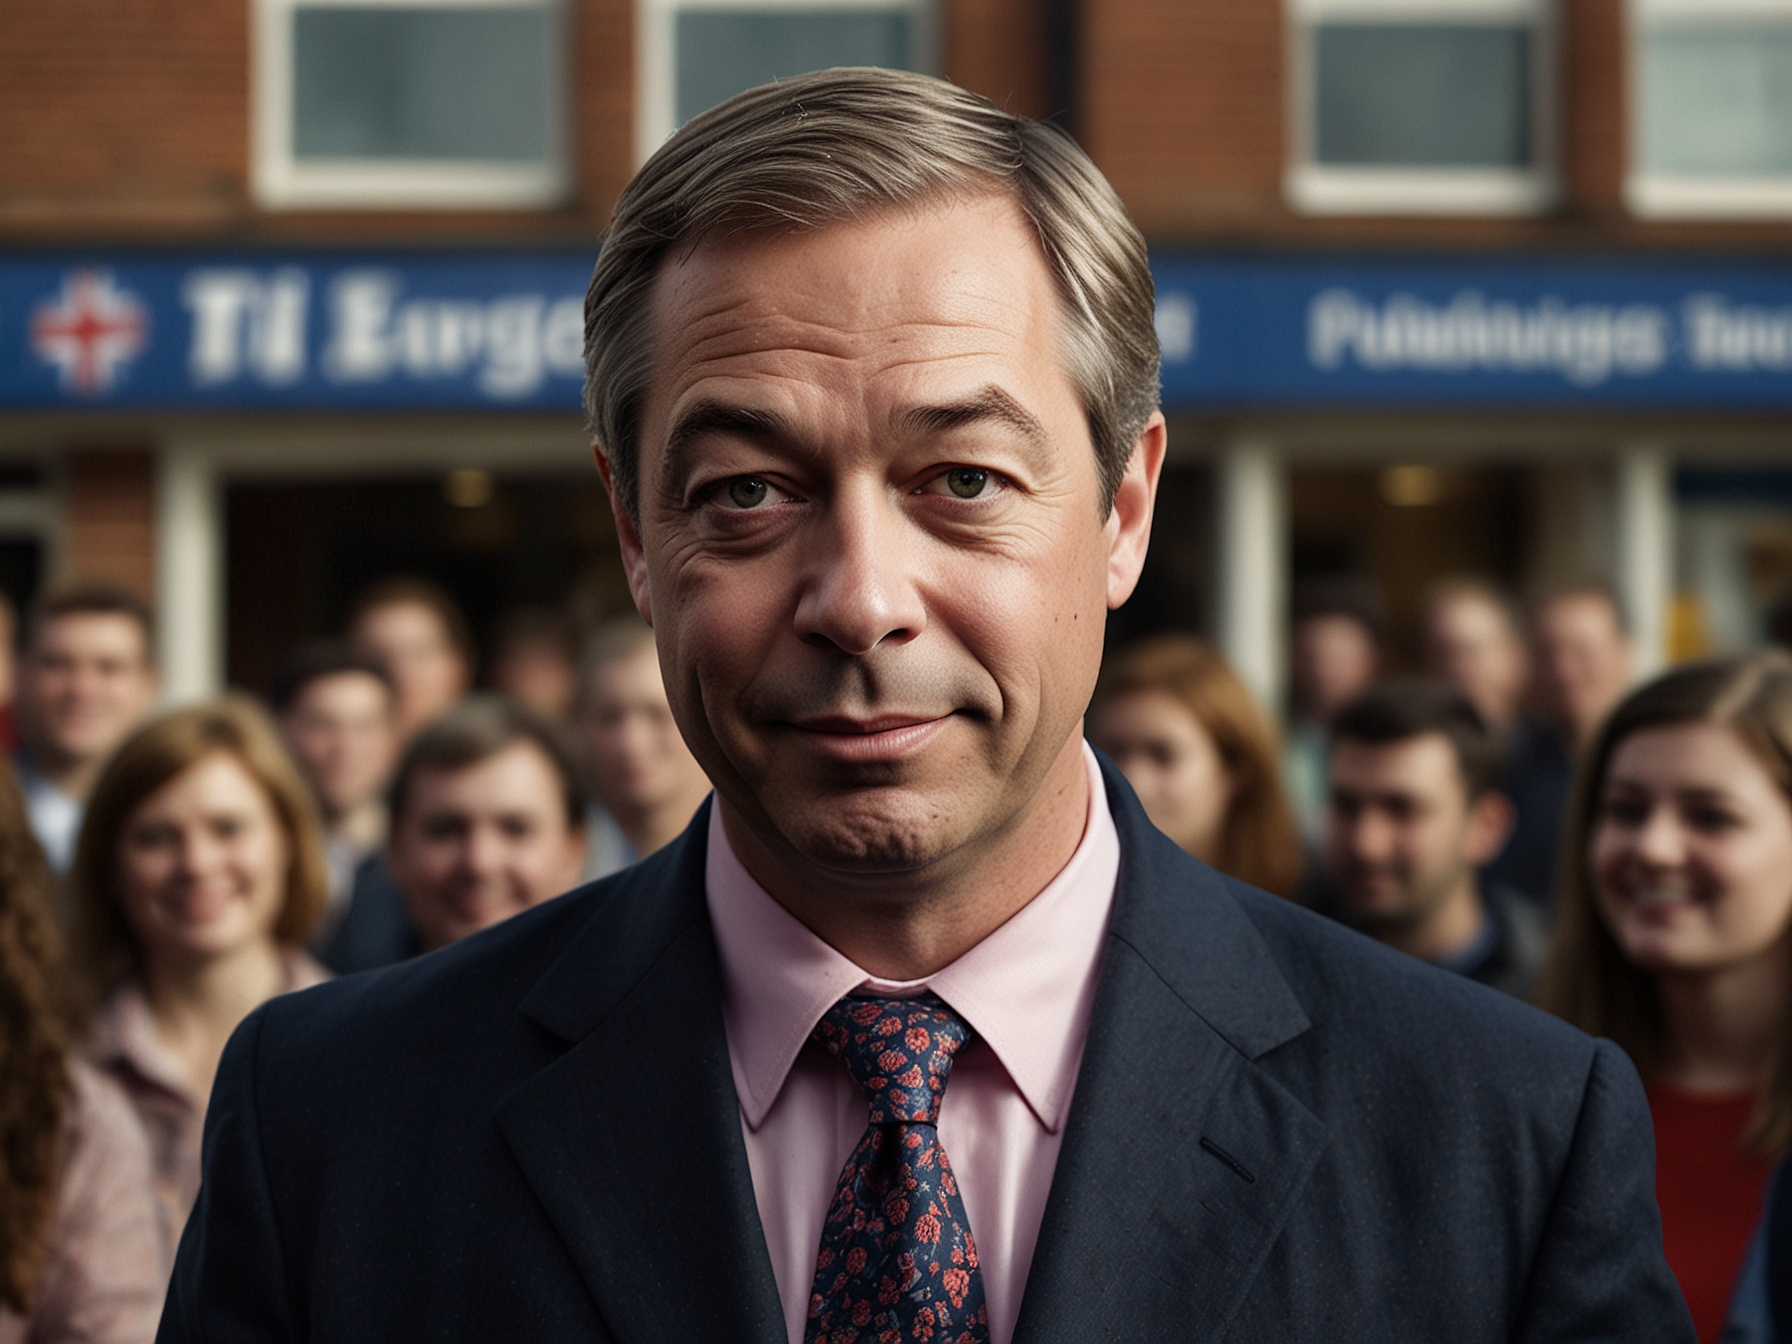 Nigel Farage engaging with Clacton constituents during his campaign, reflecting his direct approach and significant voter support, contributing to his 27-point lead in the polls.